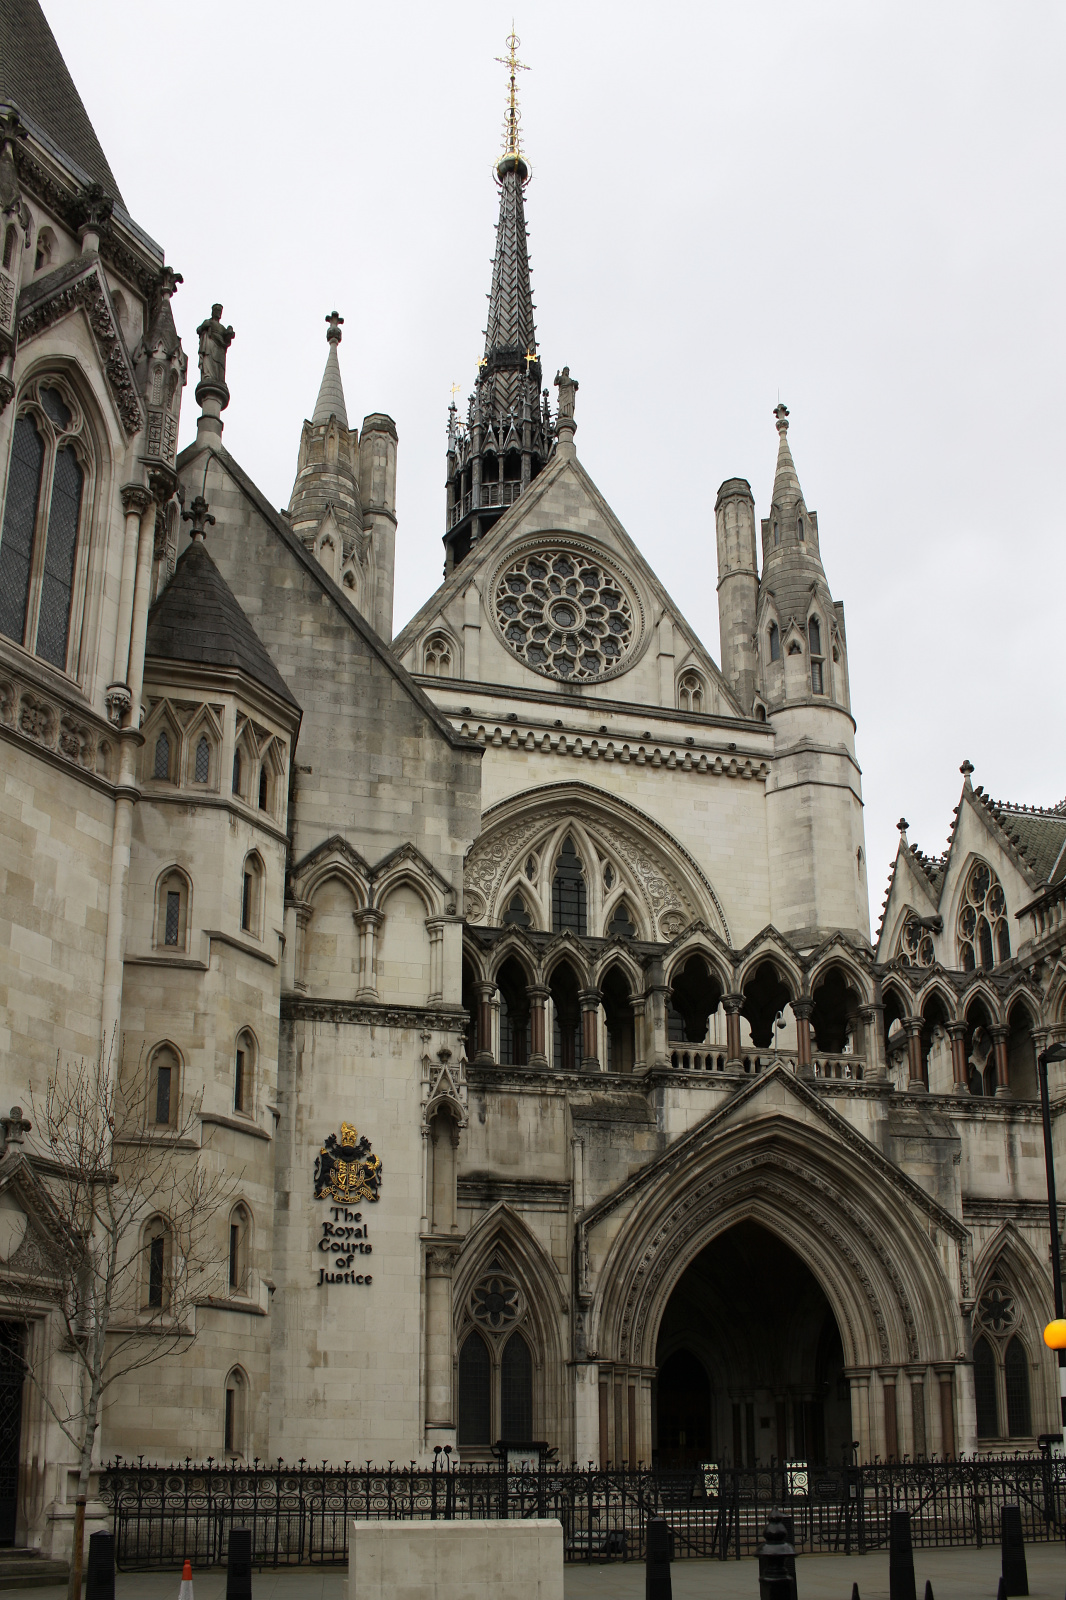 The Royal Courts of Justice (Travels » London » London at Day)